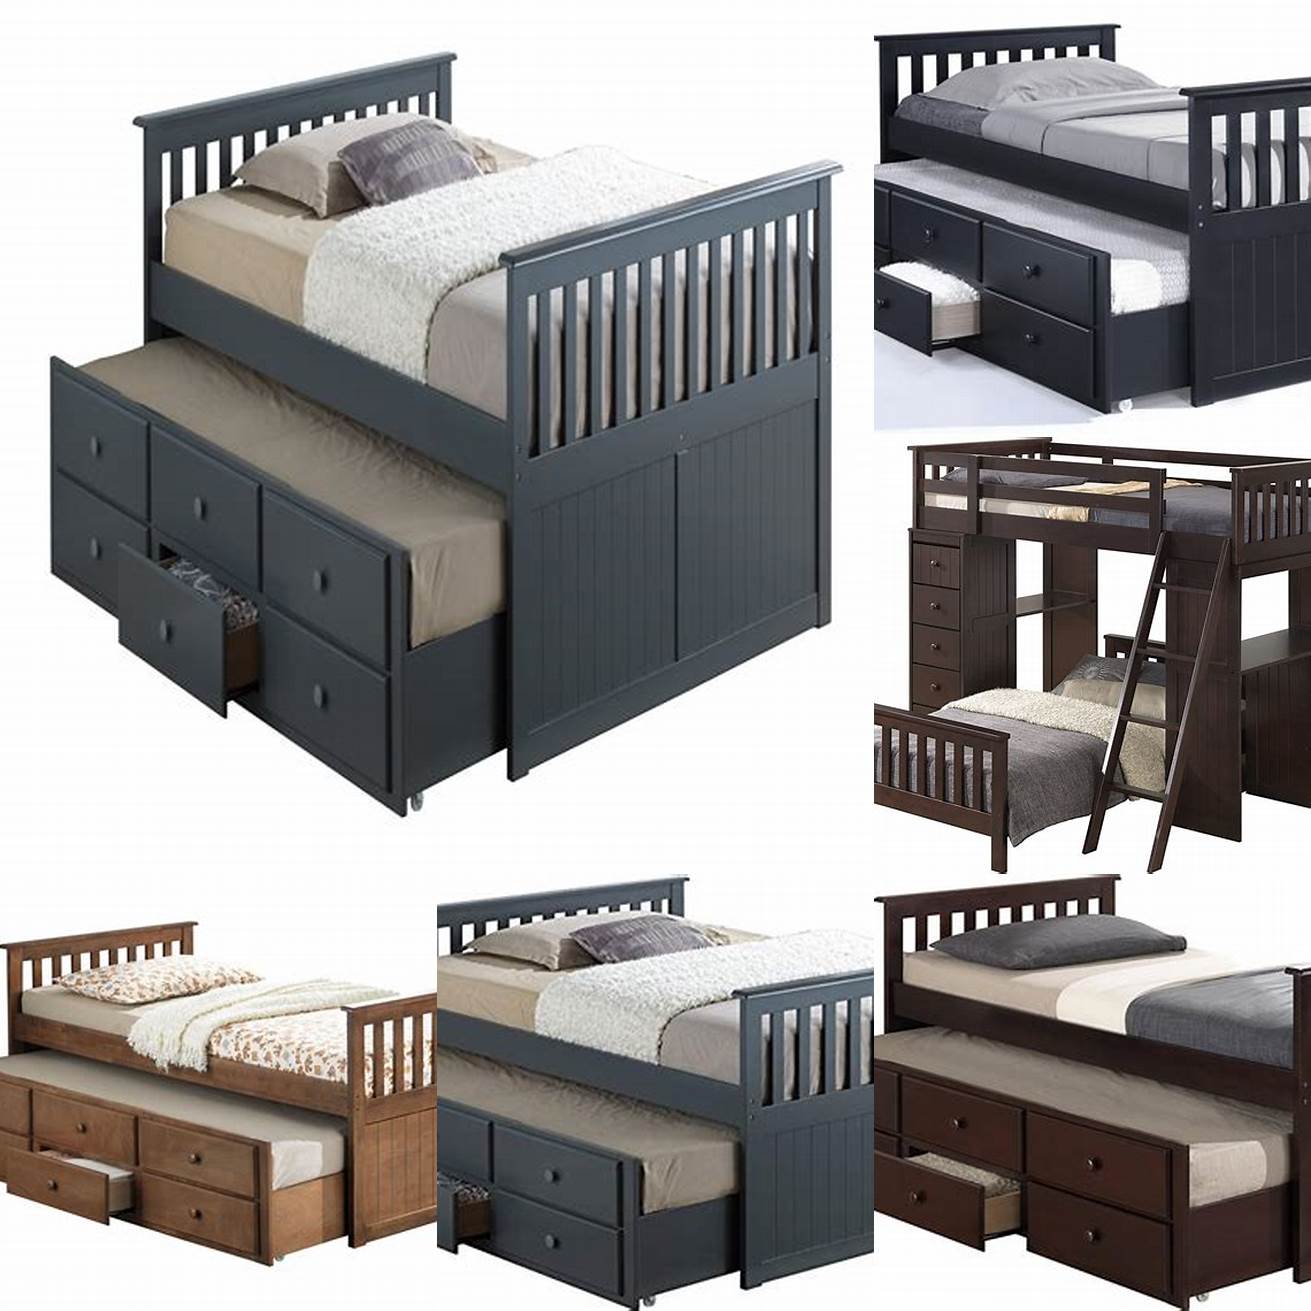 The Broyhill Kids Marco Island Captains Bed is perfect for boys who love sleepovers and need extra storage space